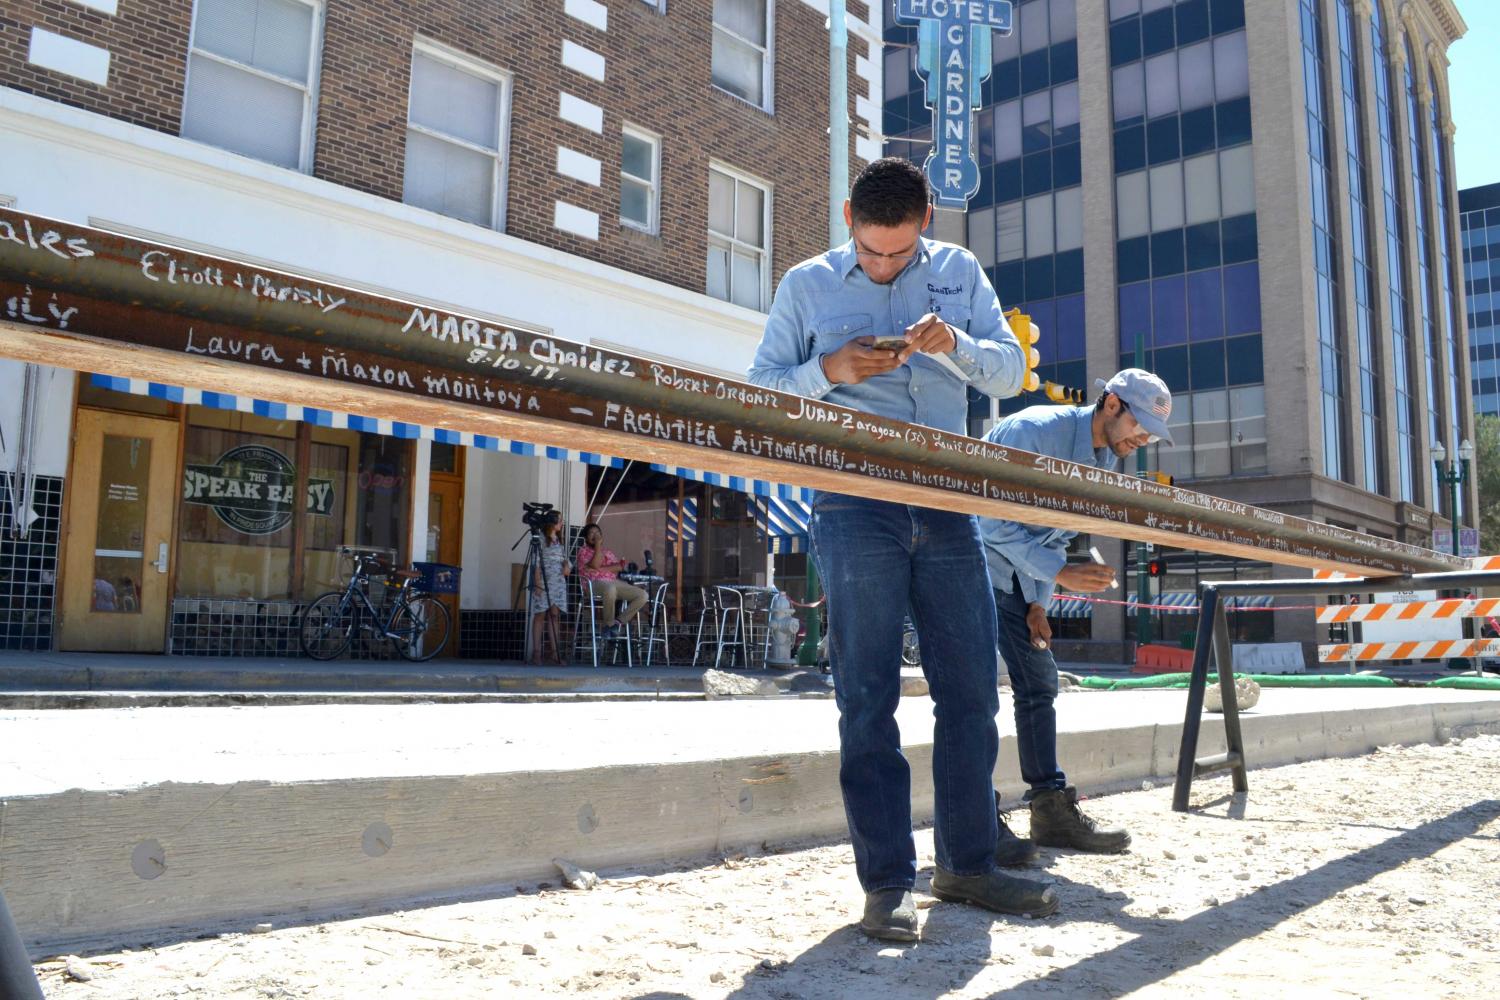 Two men sign their names of the last piece of rail on August 10th at the “Make your Mark: Sign the Last Piece of Rail” event in Downtown El Paso.